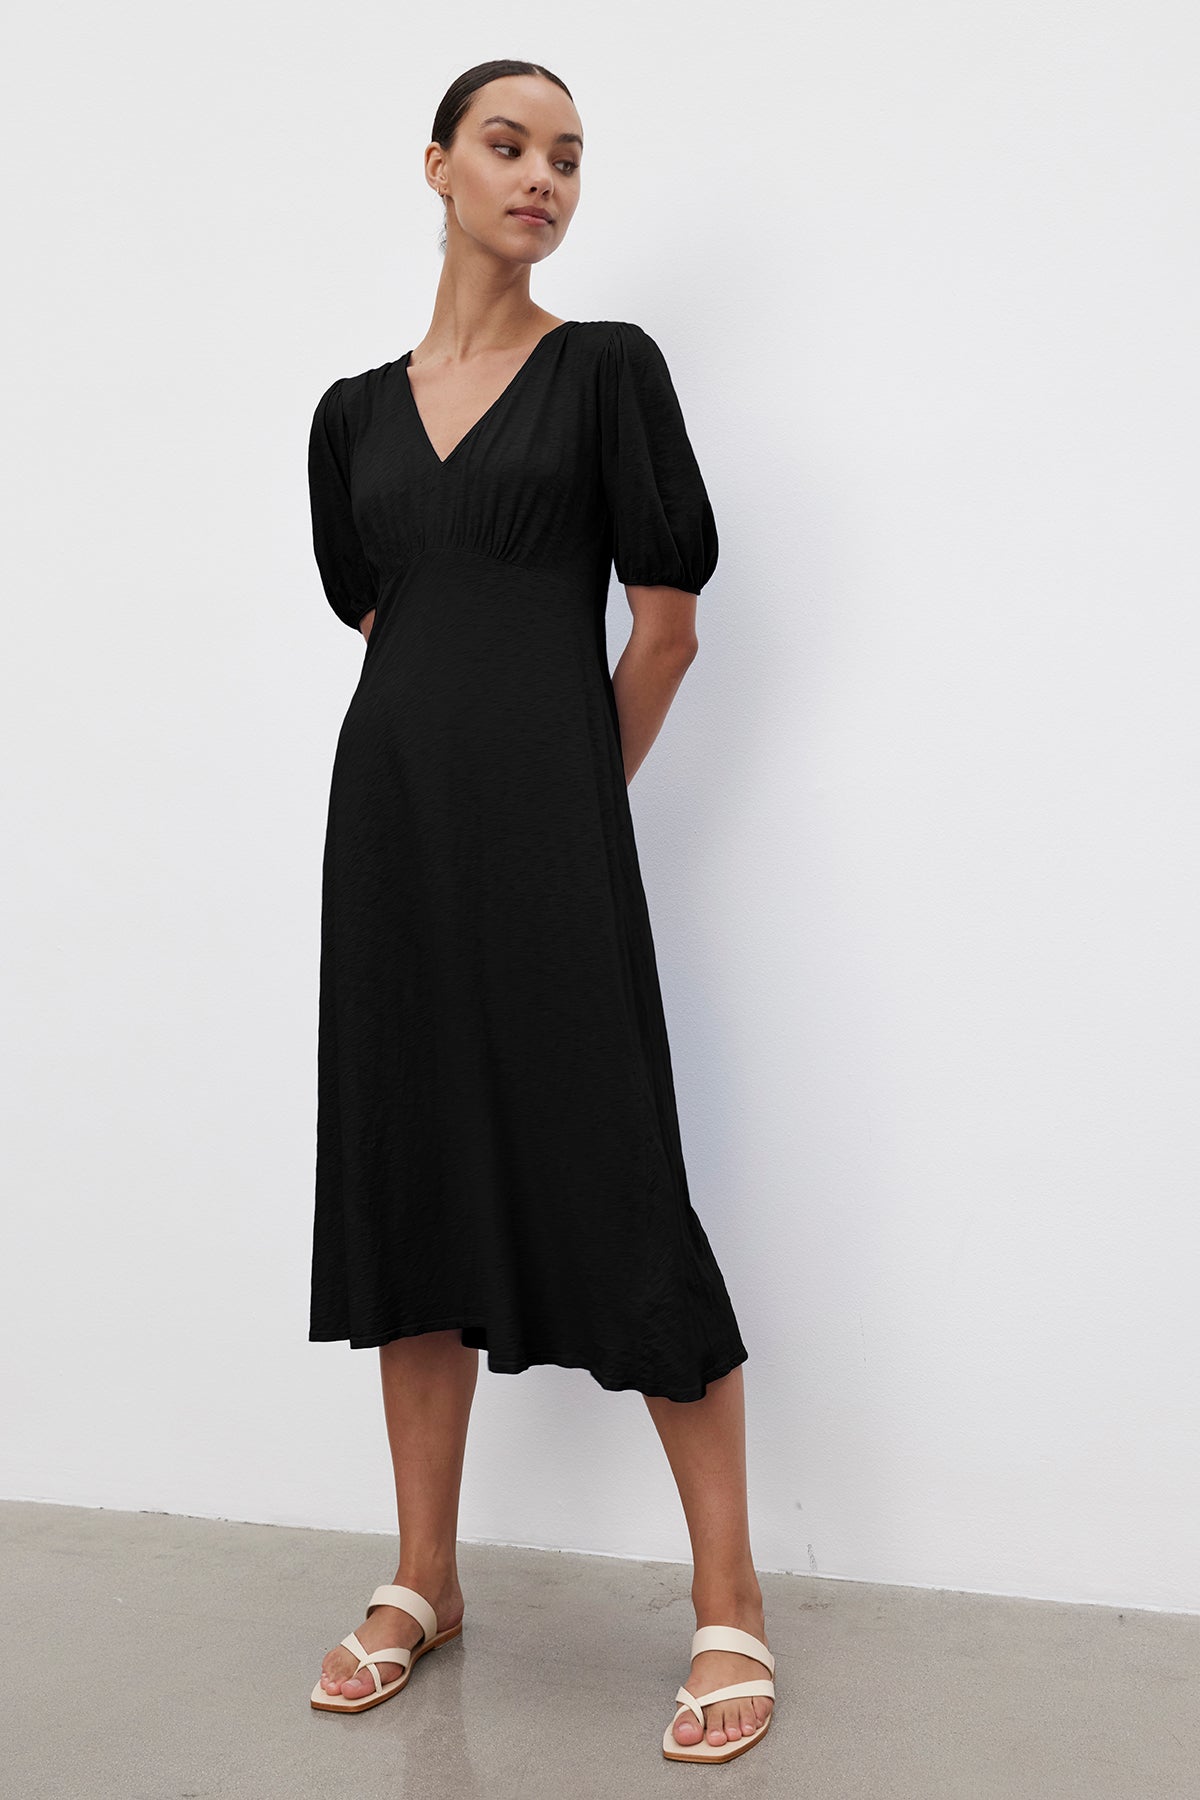 A person stands against a white background wearing the Velvet by Graham & Spencer PARKER COTTON SLUB MIDI DRESS with short, puffed sleeves and white sandals, with hands behind their back.-37185421902017